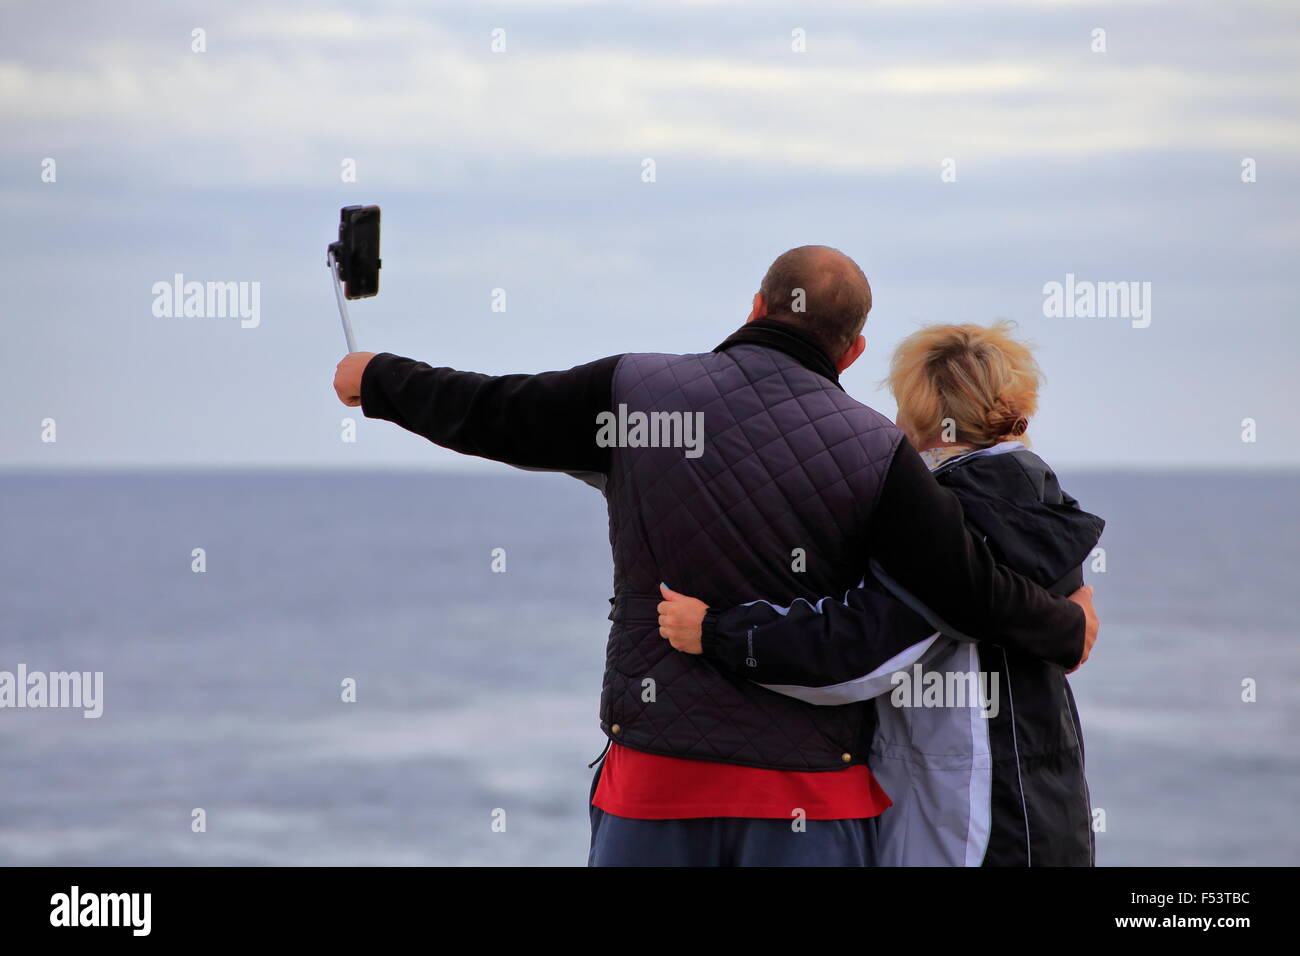 A man and a woman or couple taking a selfie picture with a smartphone on a selfie stick Stock Photo